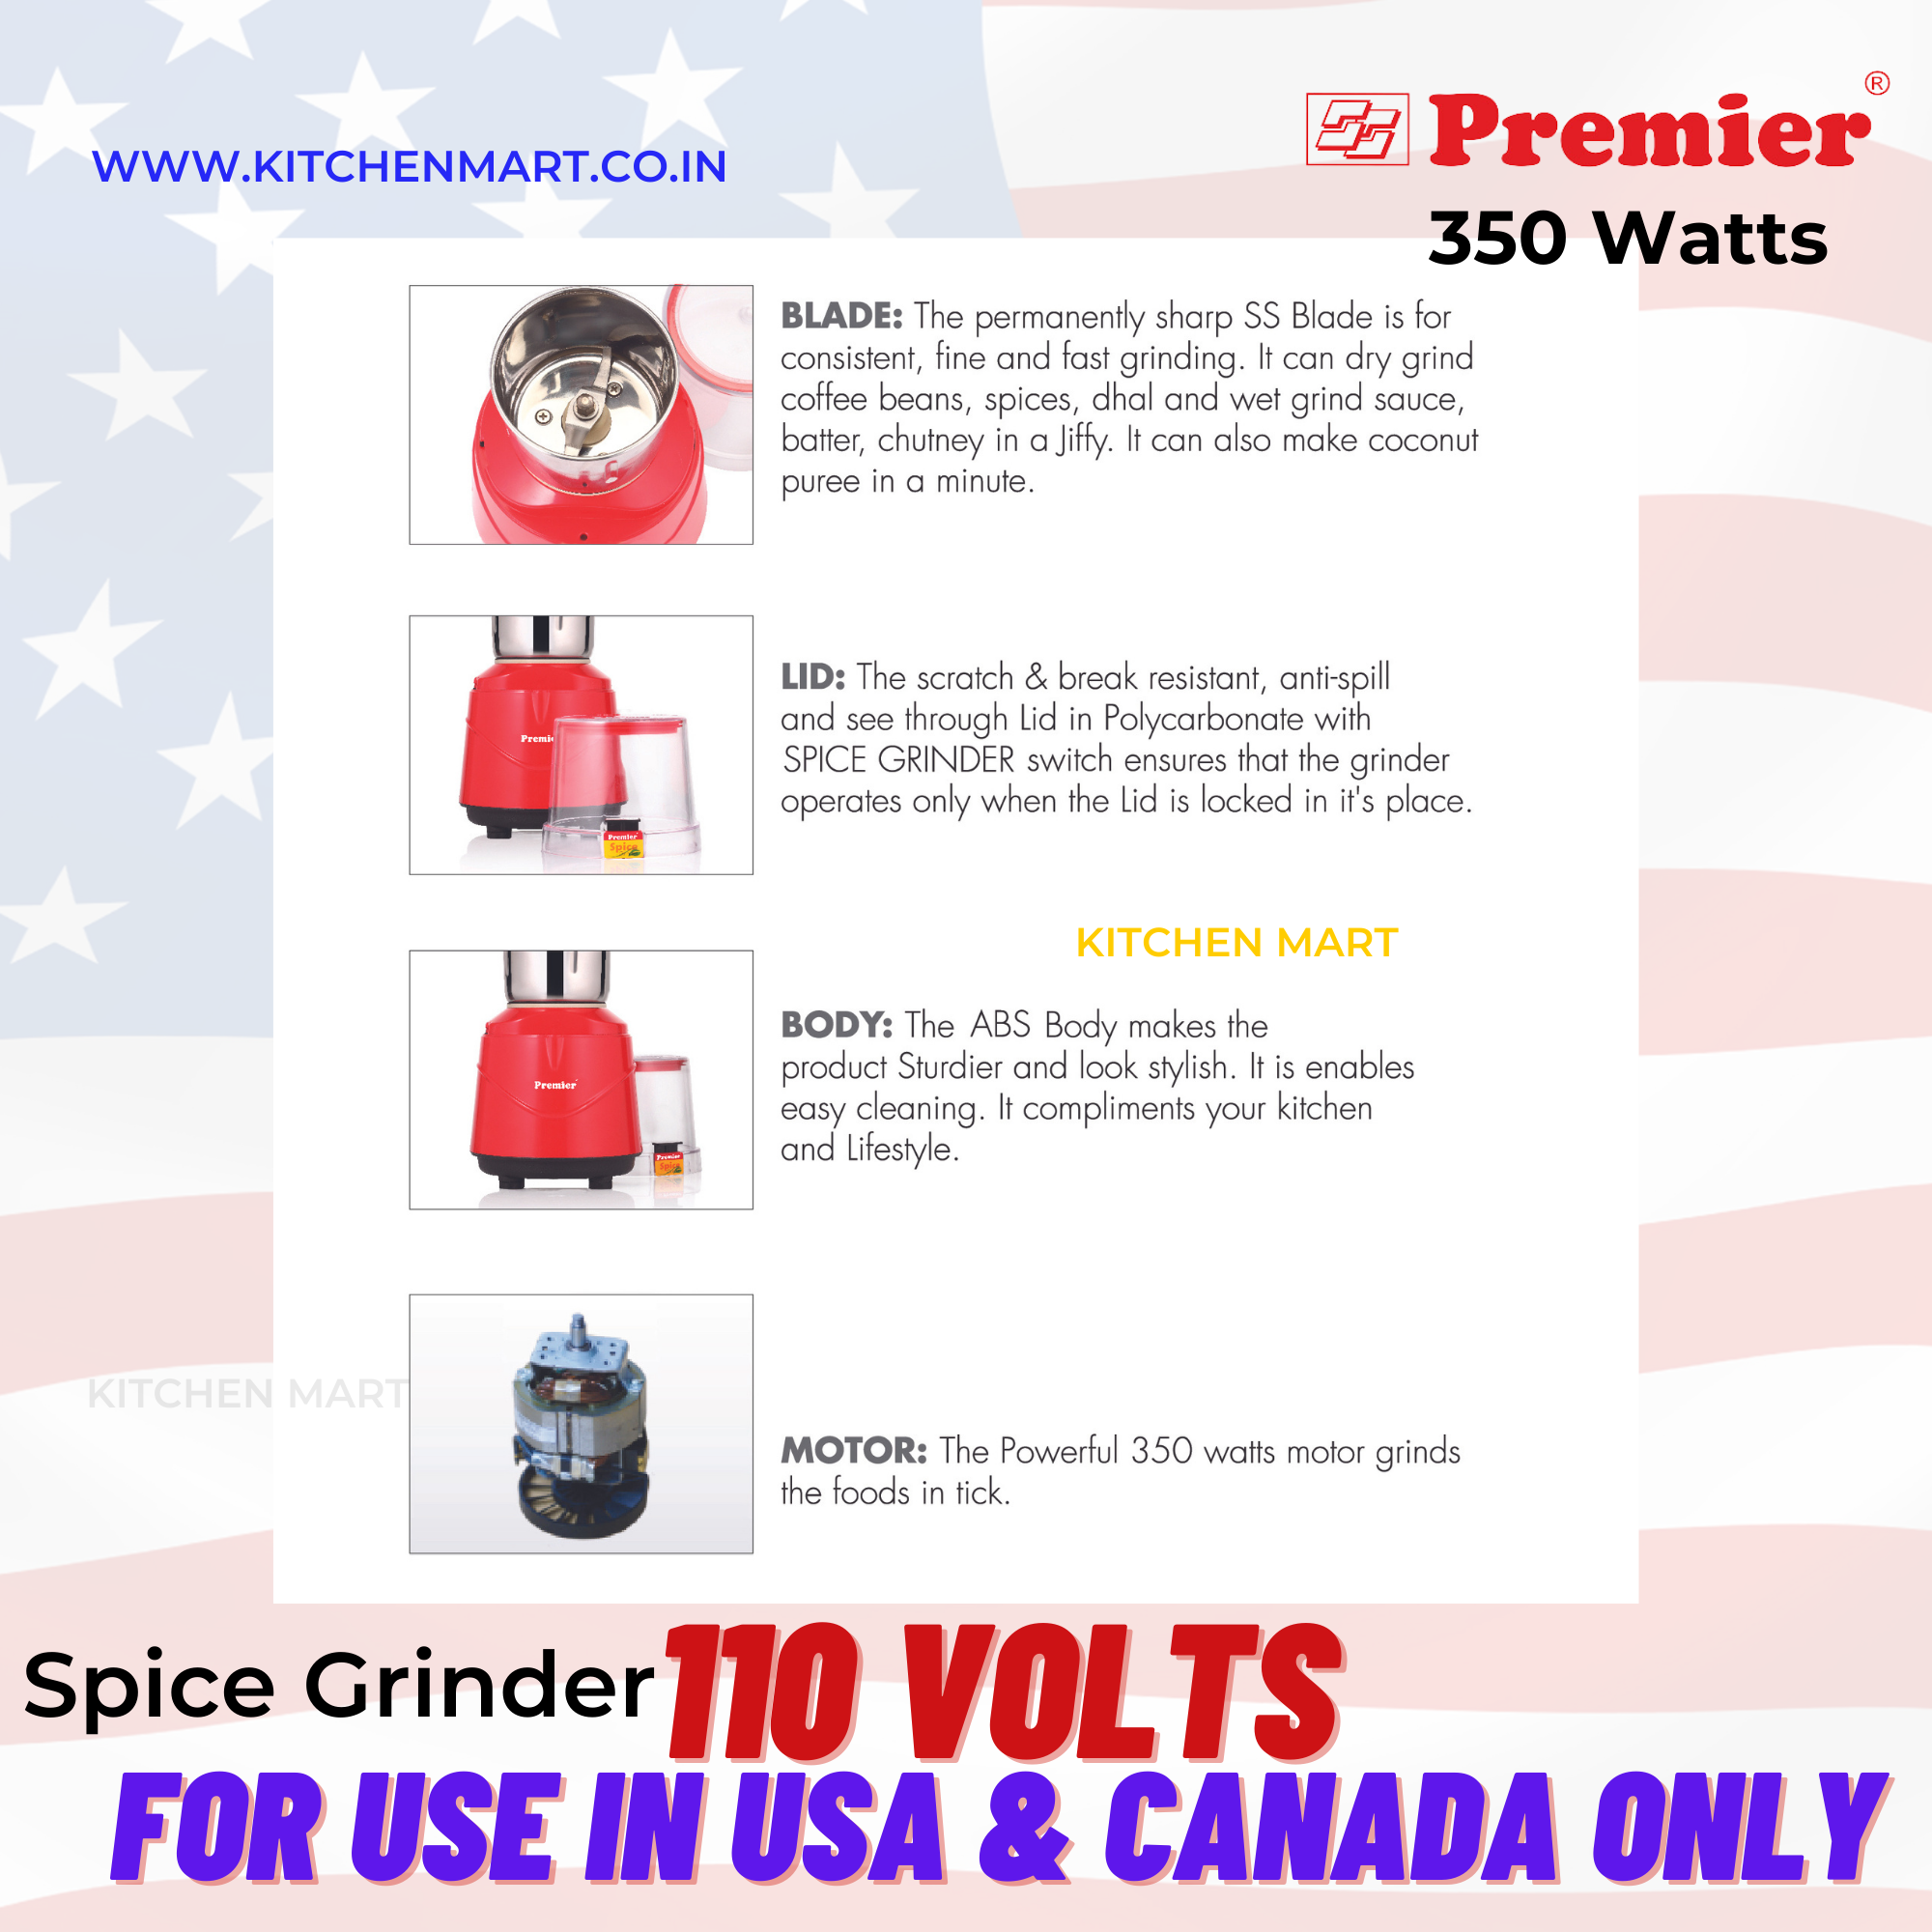 Premier Spice Grinder 🌶️ – Powerful 350W Electric Grinder ⚡ for Coffee Beans ☕, Spices 🍛, and More – Stylish Red Finish ❤️ with Clear Lid 🔍 - 110 volts for USA and Canada only